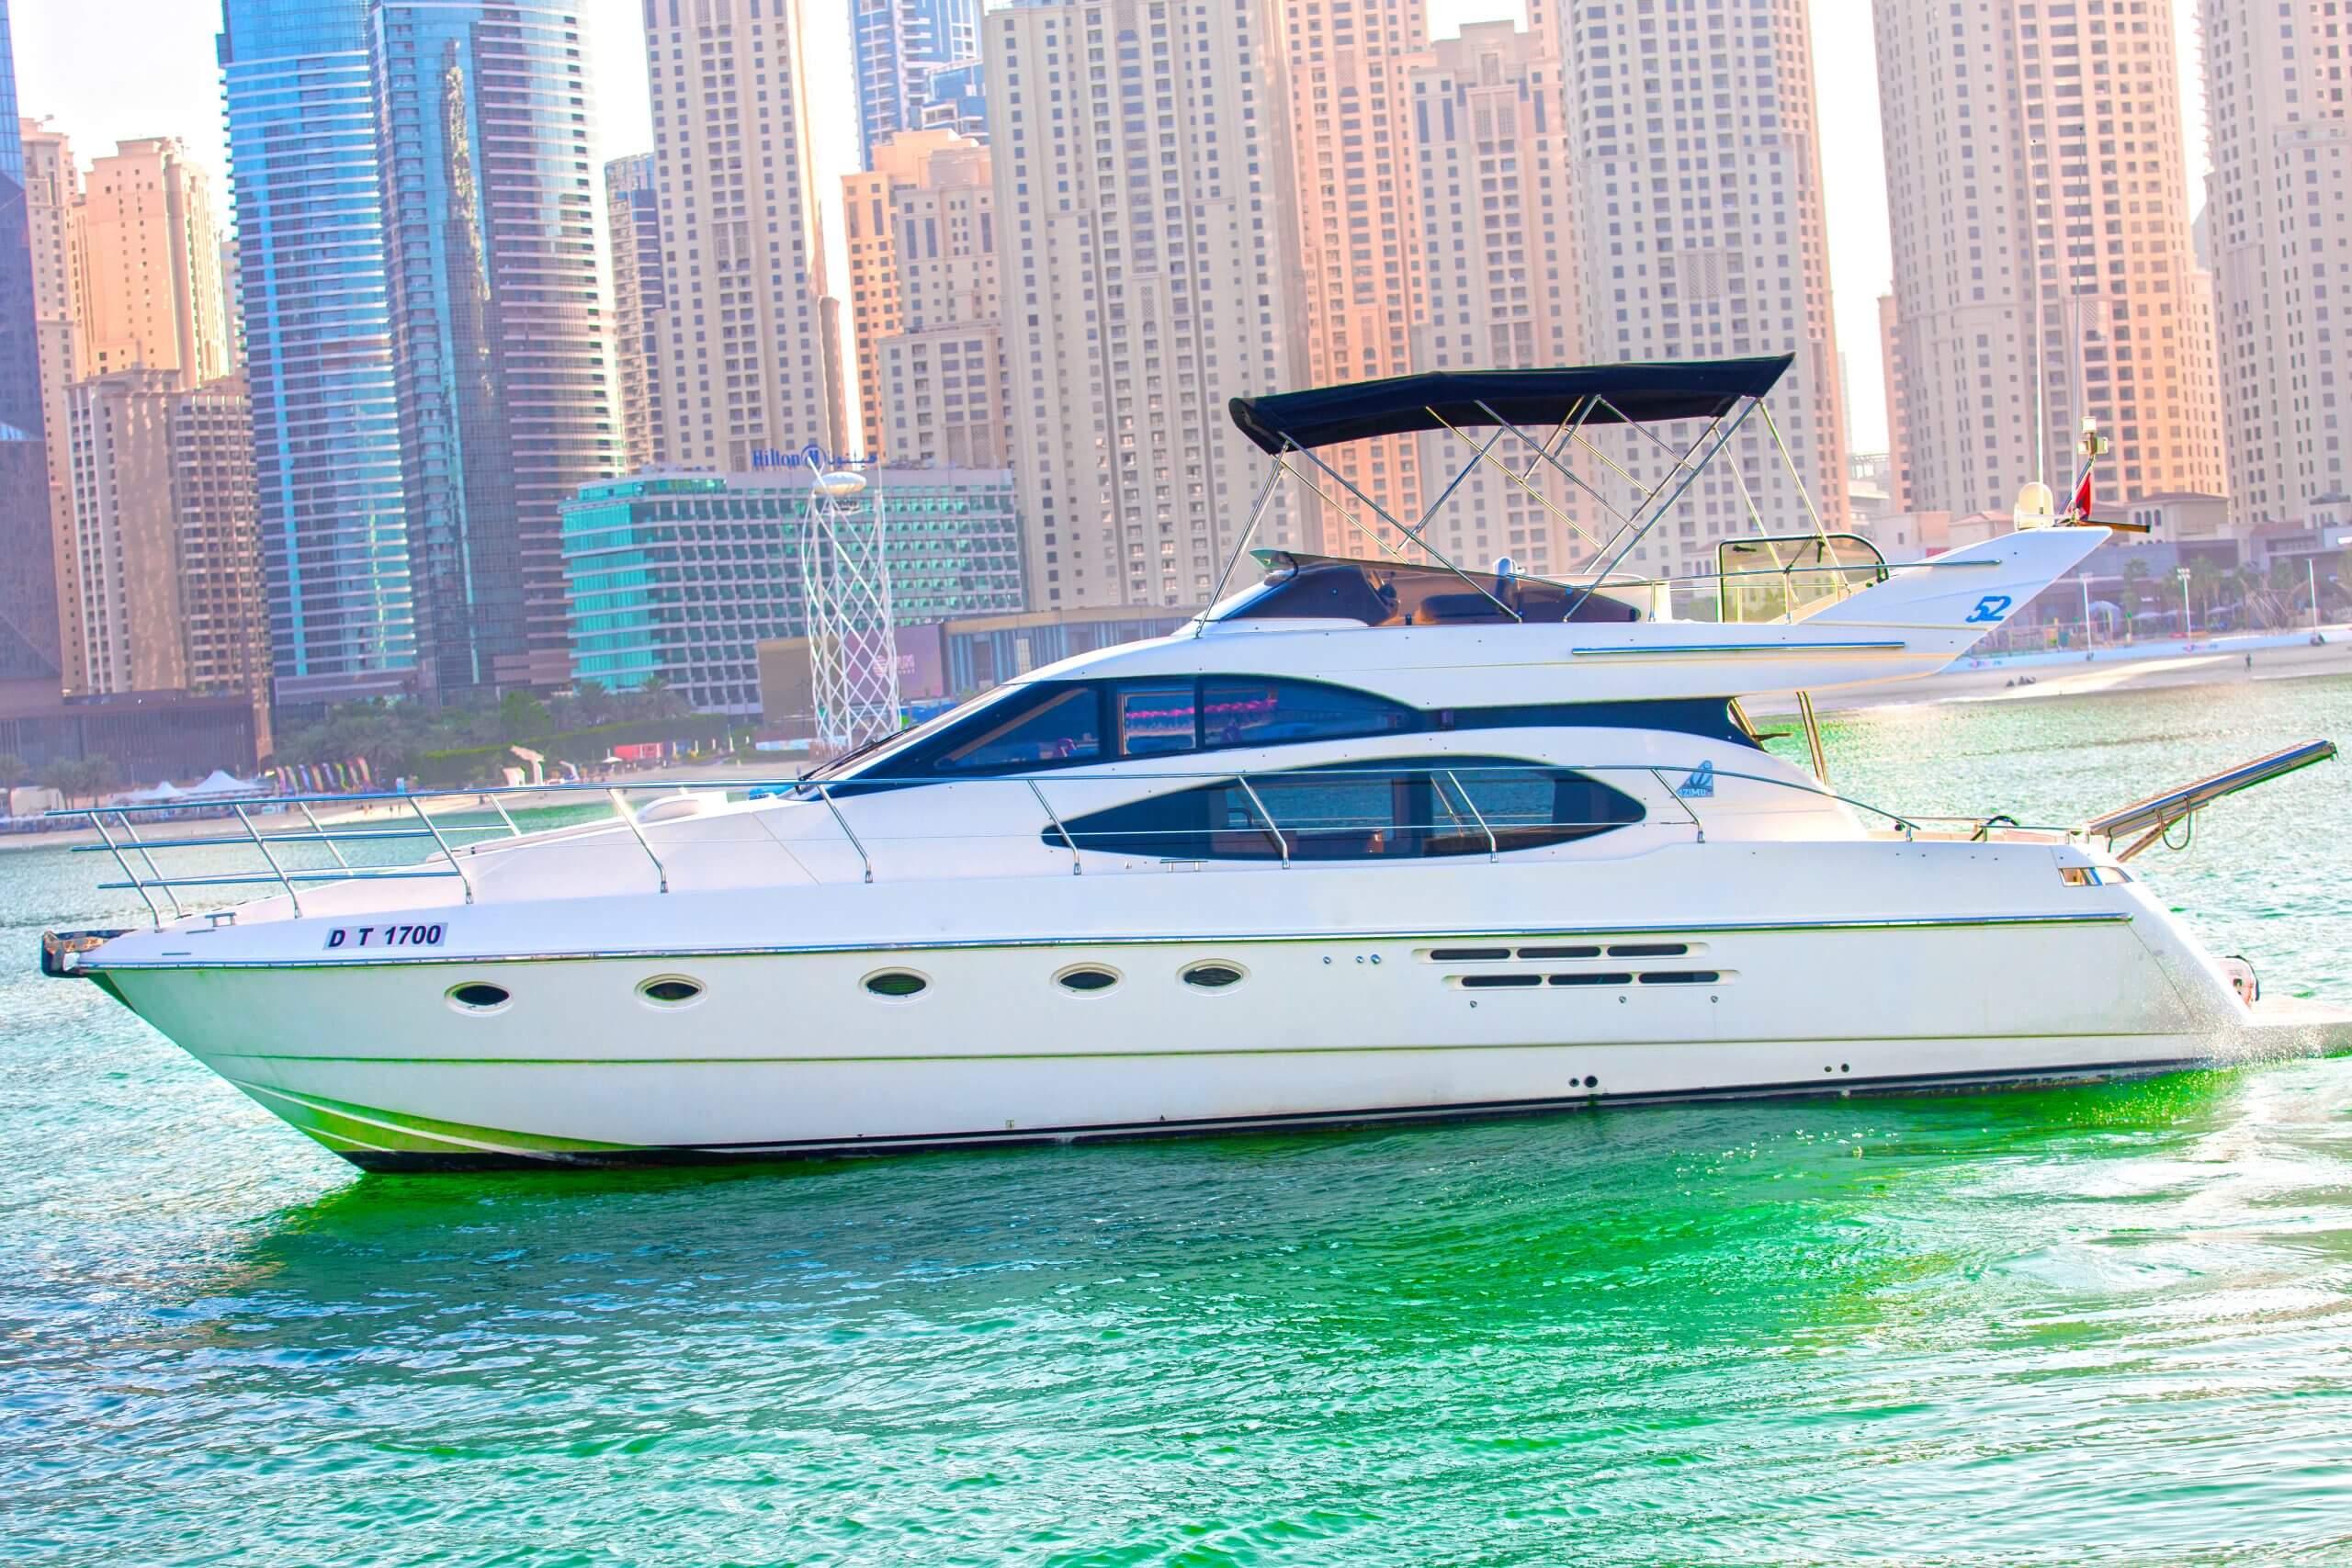 52FT (6-Hour cruise 22,000AED)